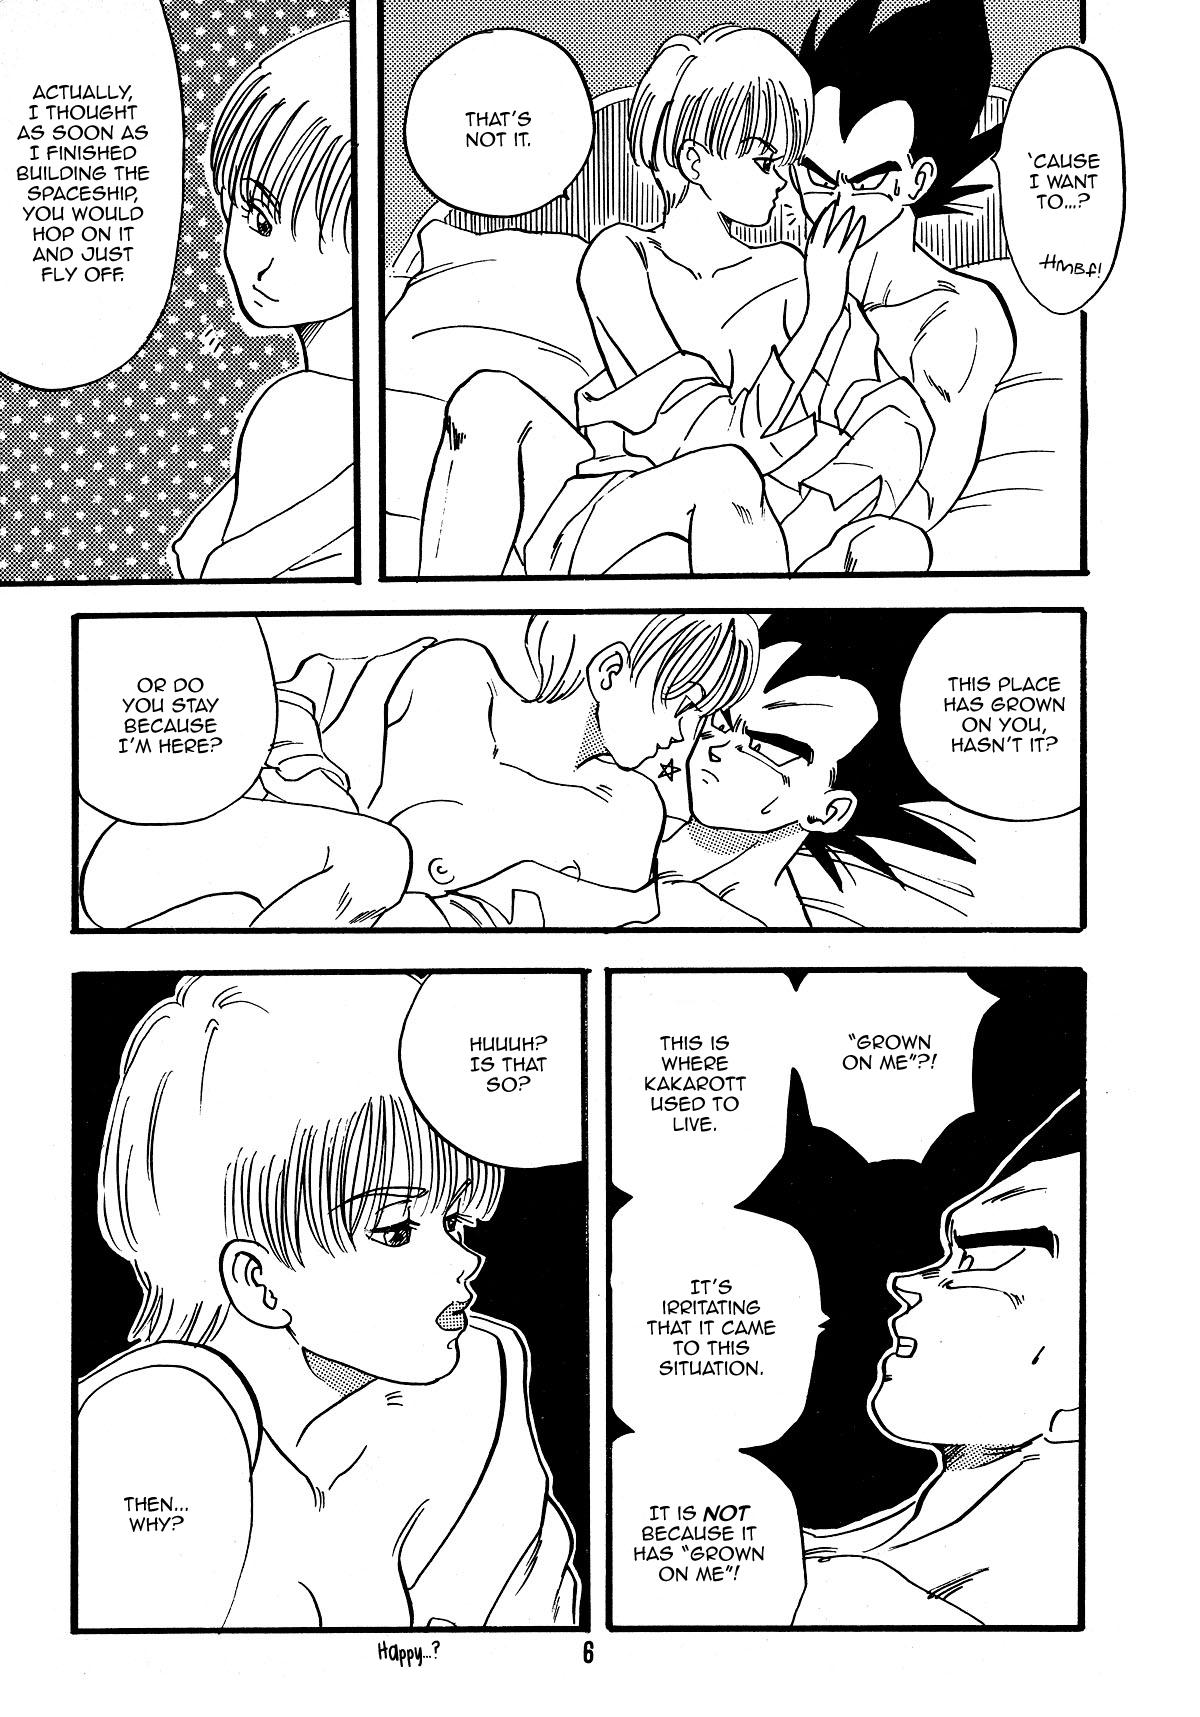 Celebrity Nudes E Flame - Dragon ball Argentina - Page 7